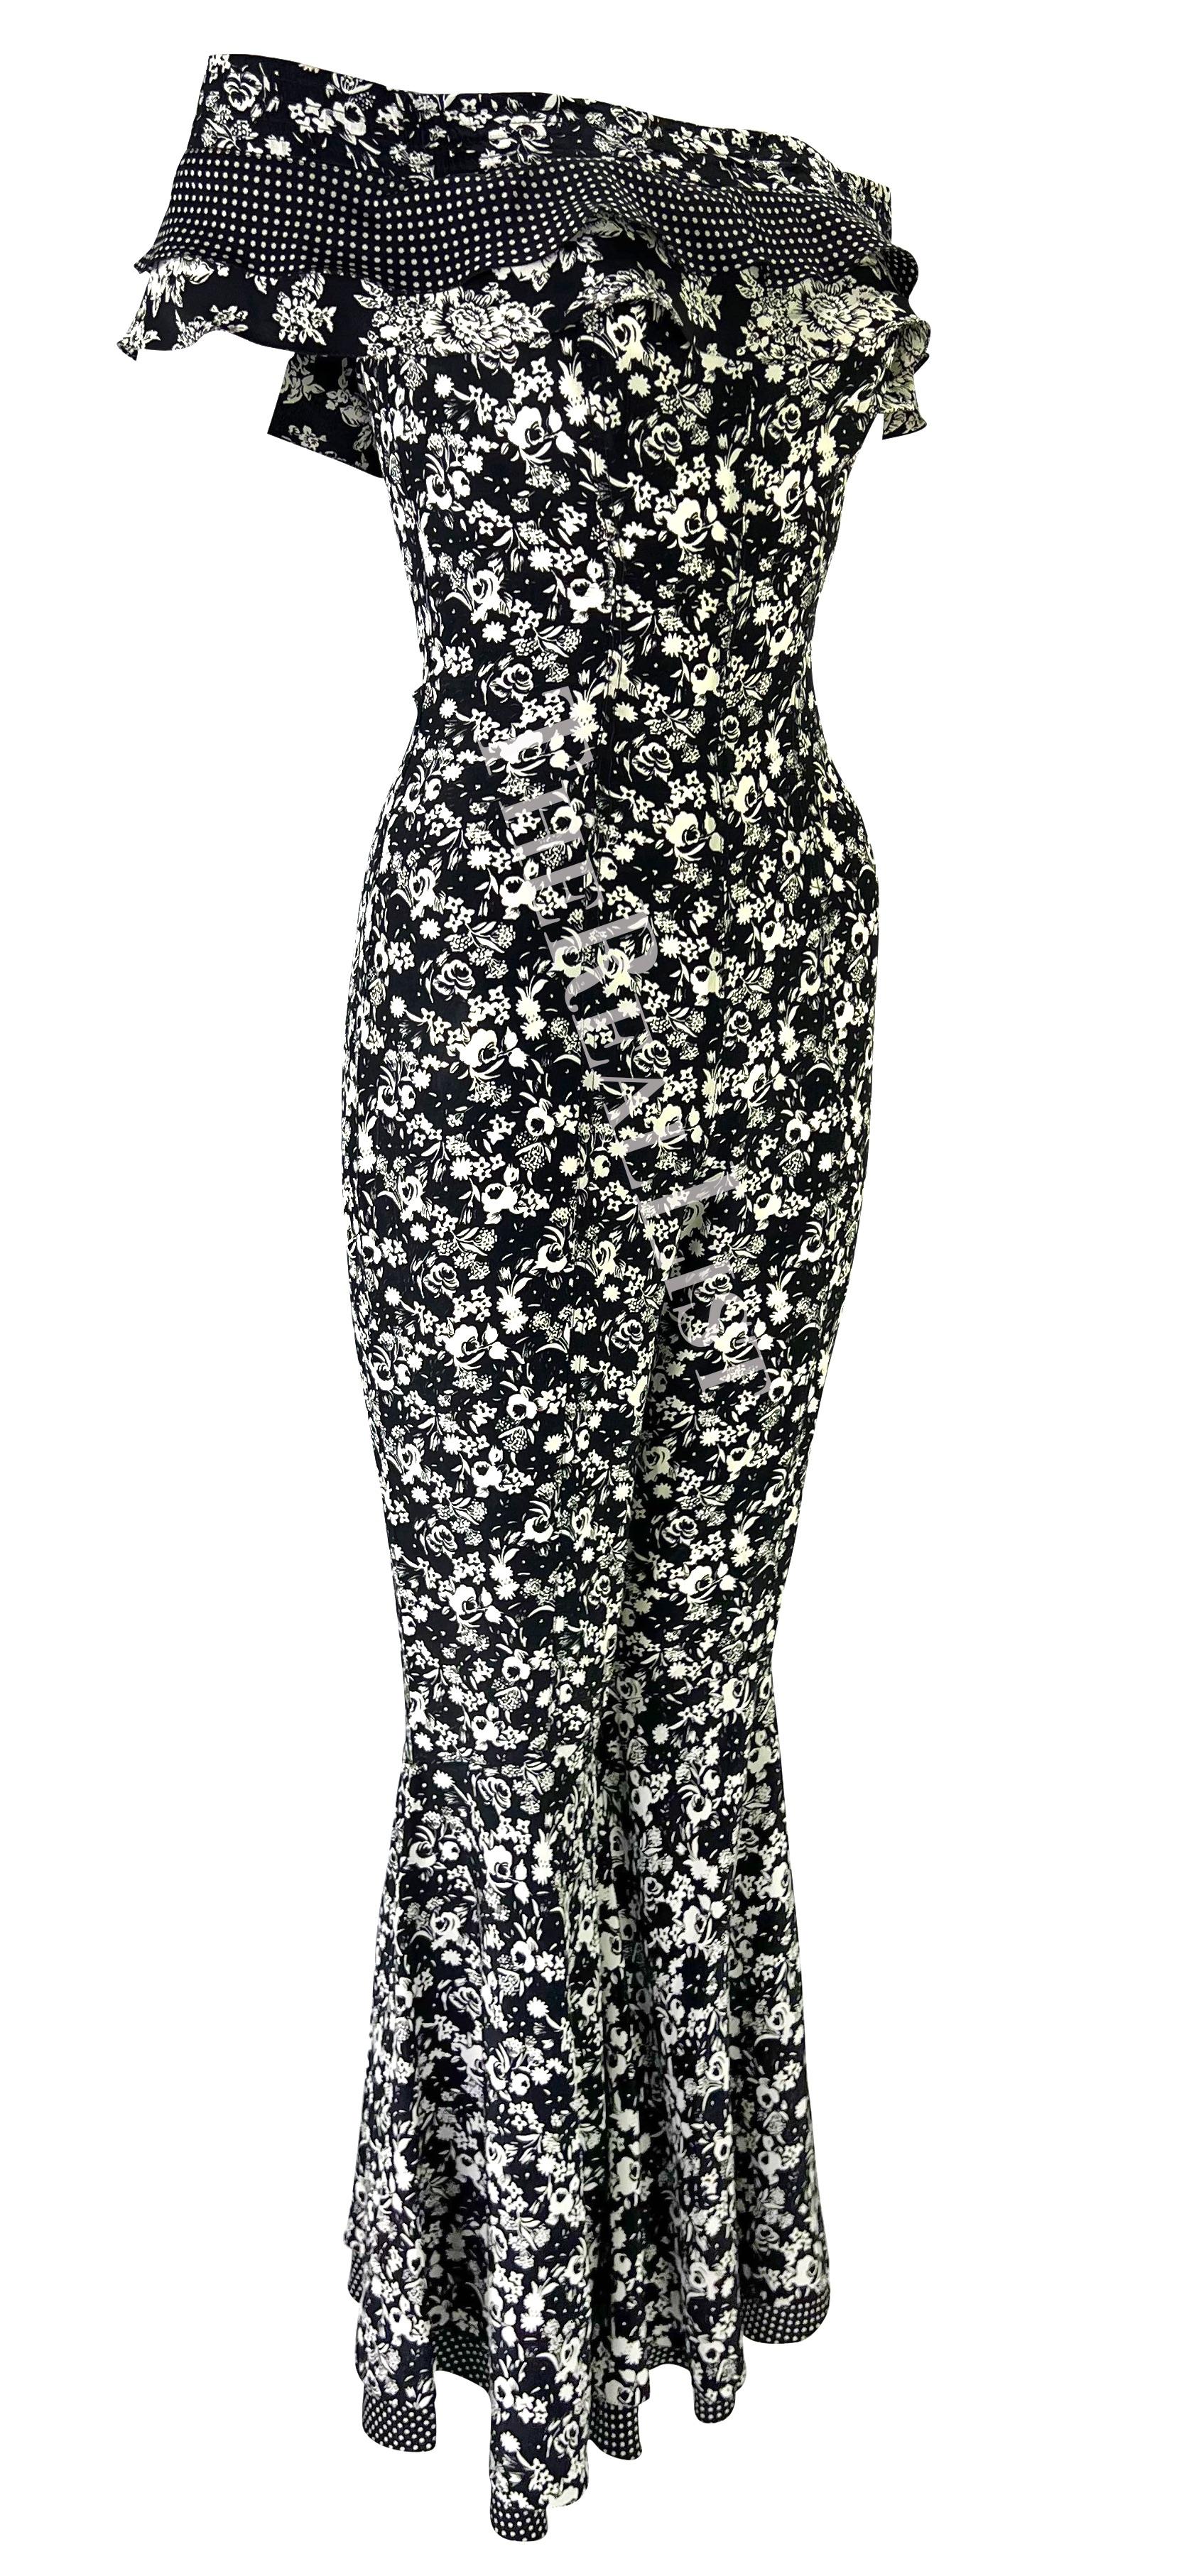 S/S 1993 Gianni Versace Black White Floral Flared Bell-Bottom Catsuit For Sale 3